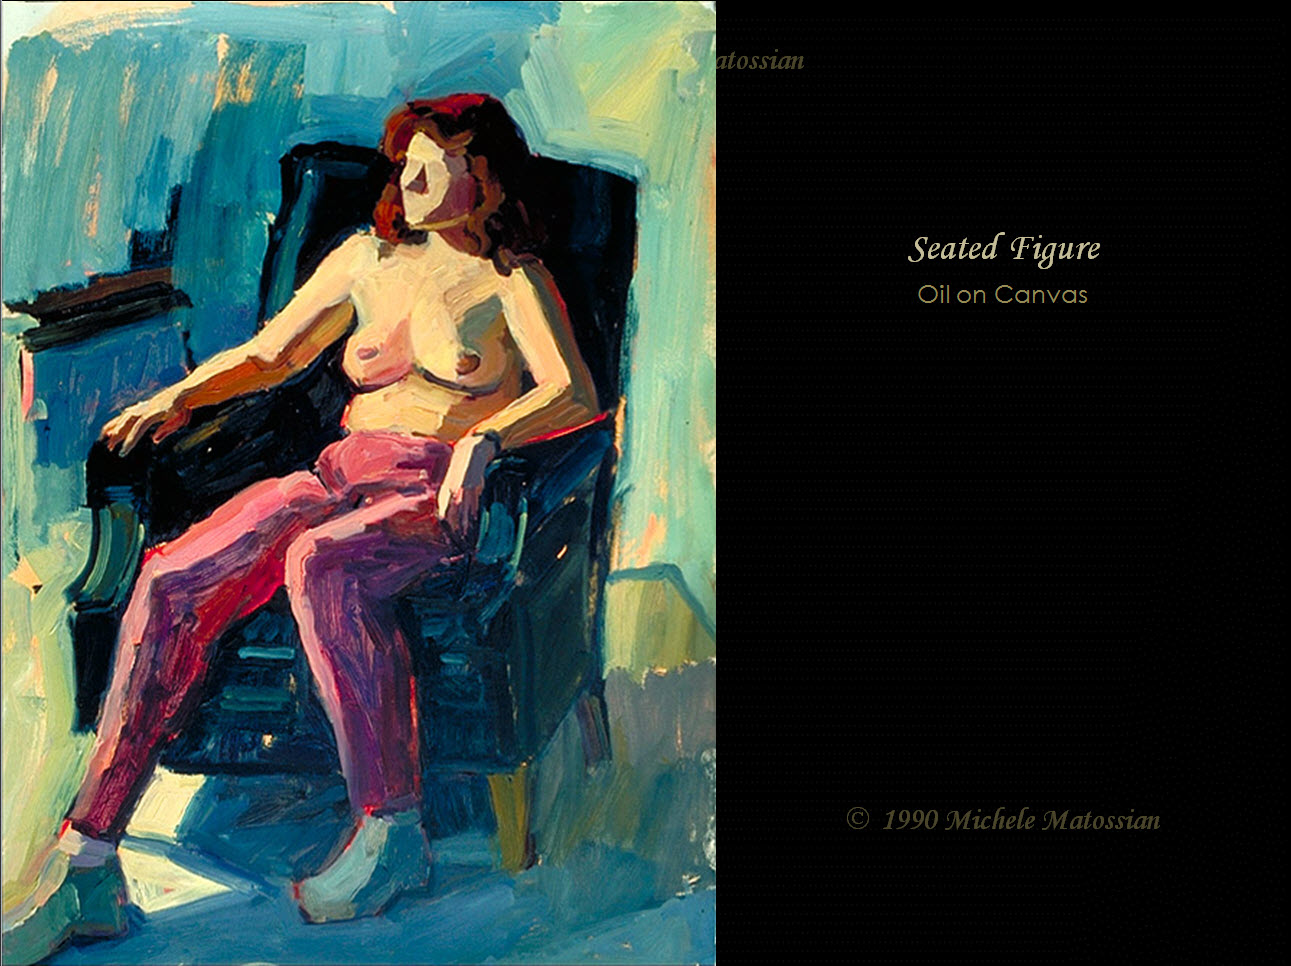 Midwinter Light and Seated Figure